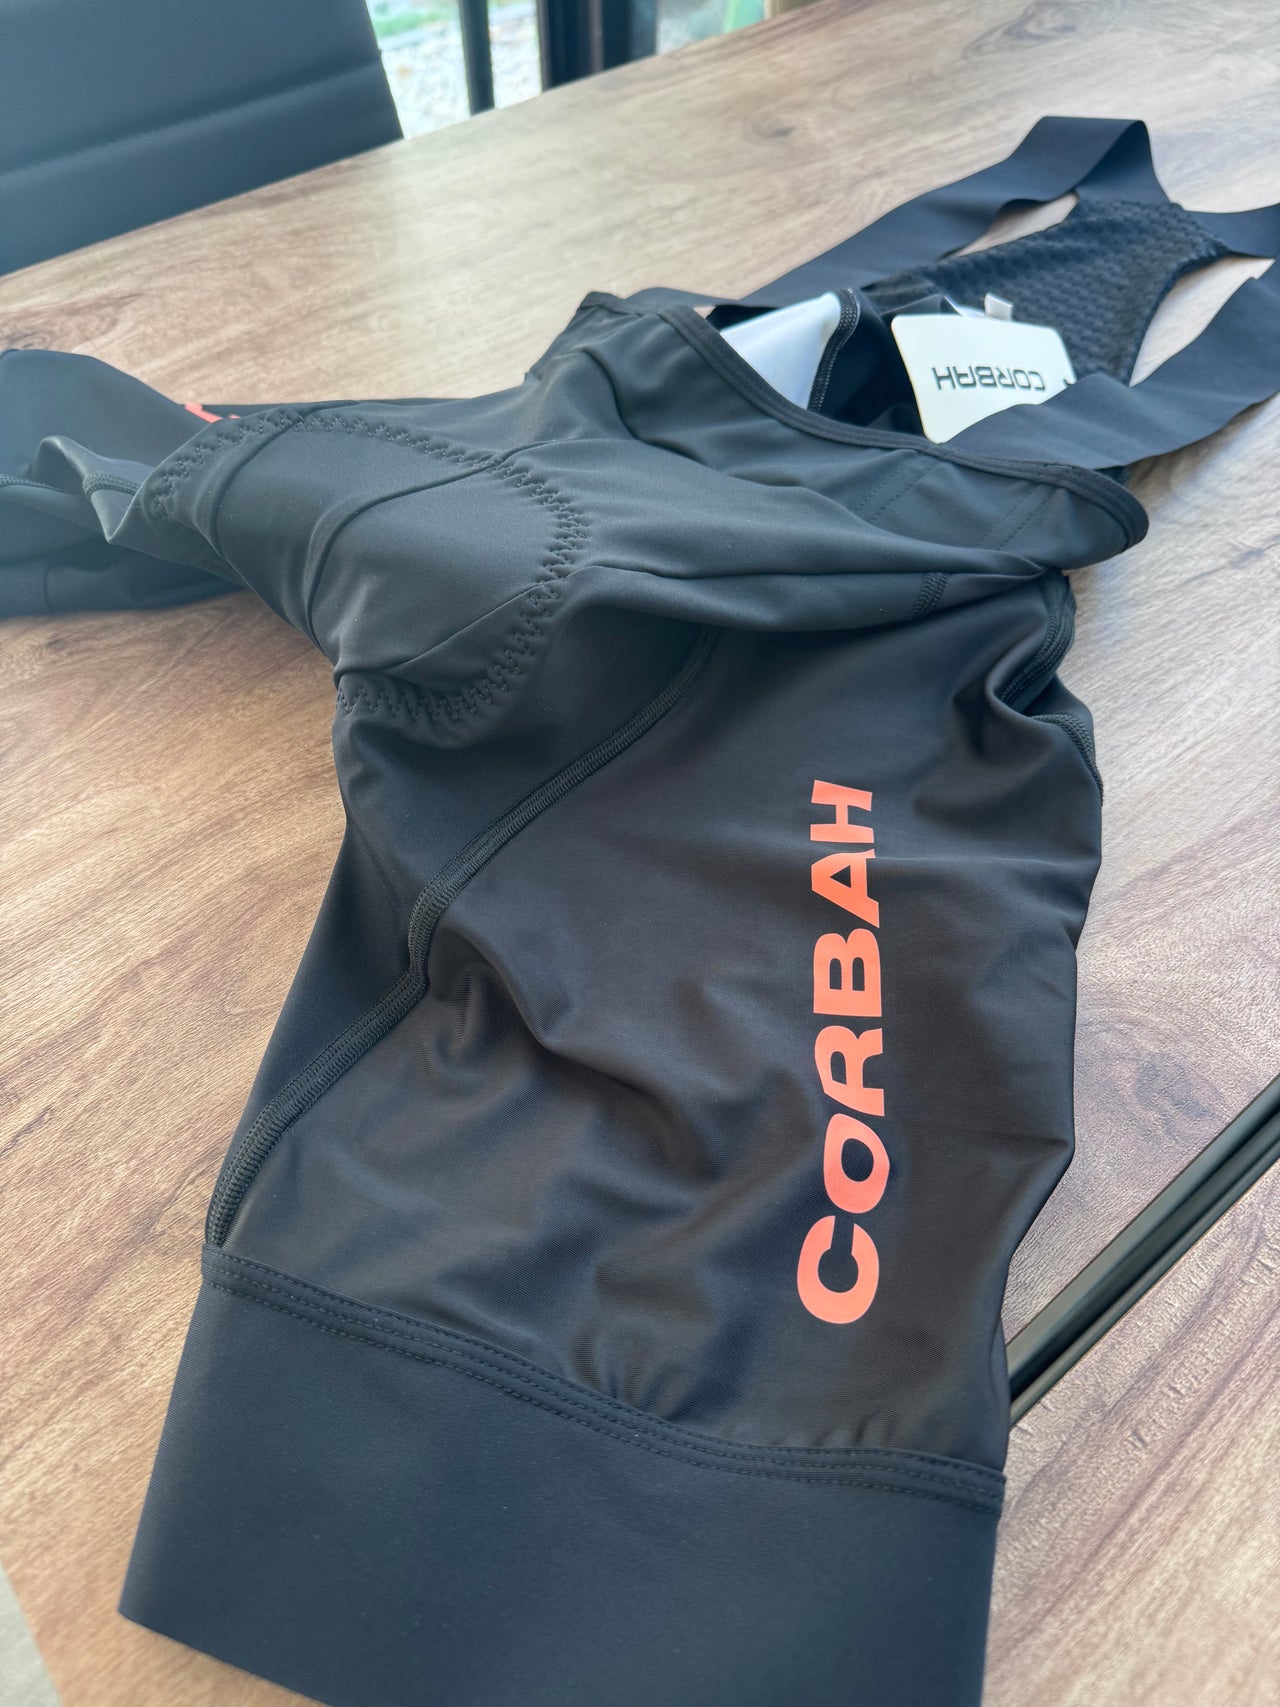 Corbah - Cycling Apparel for the World